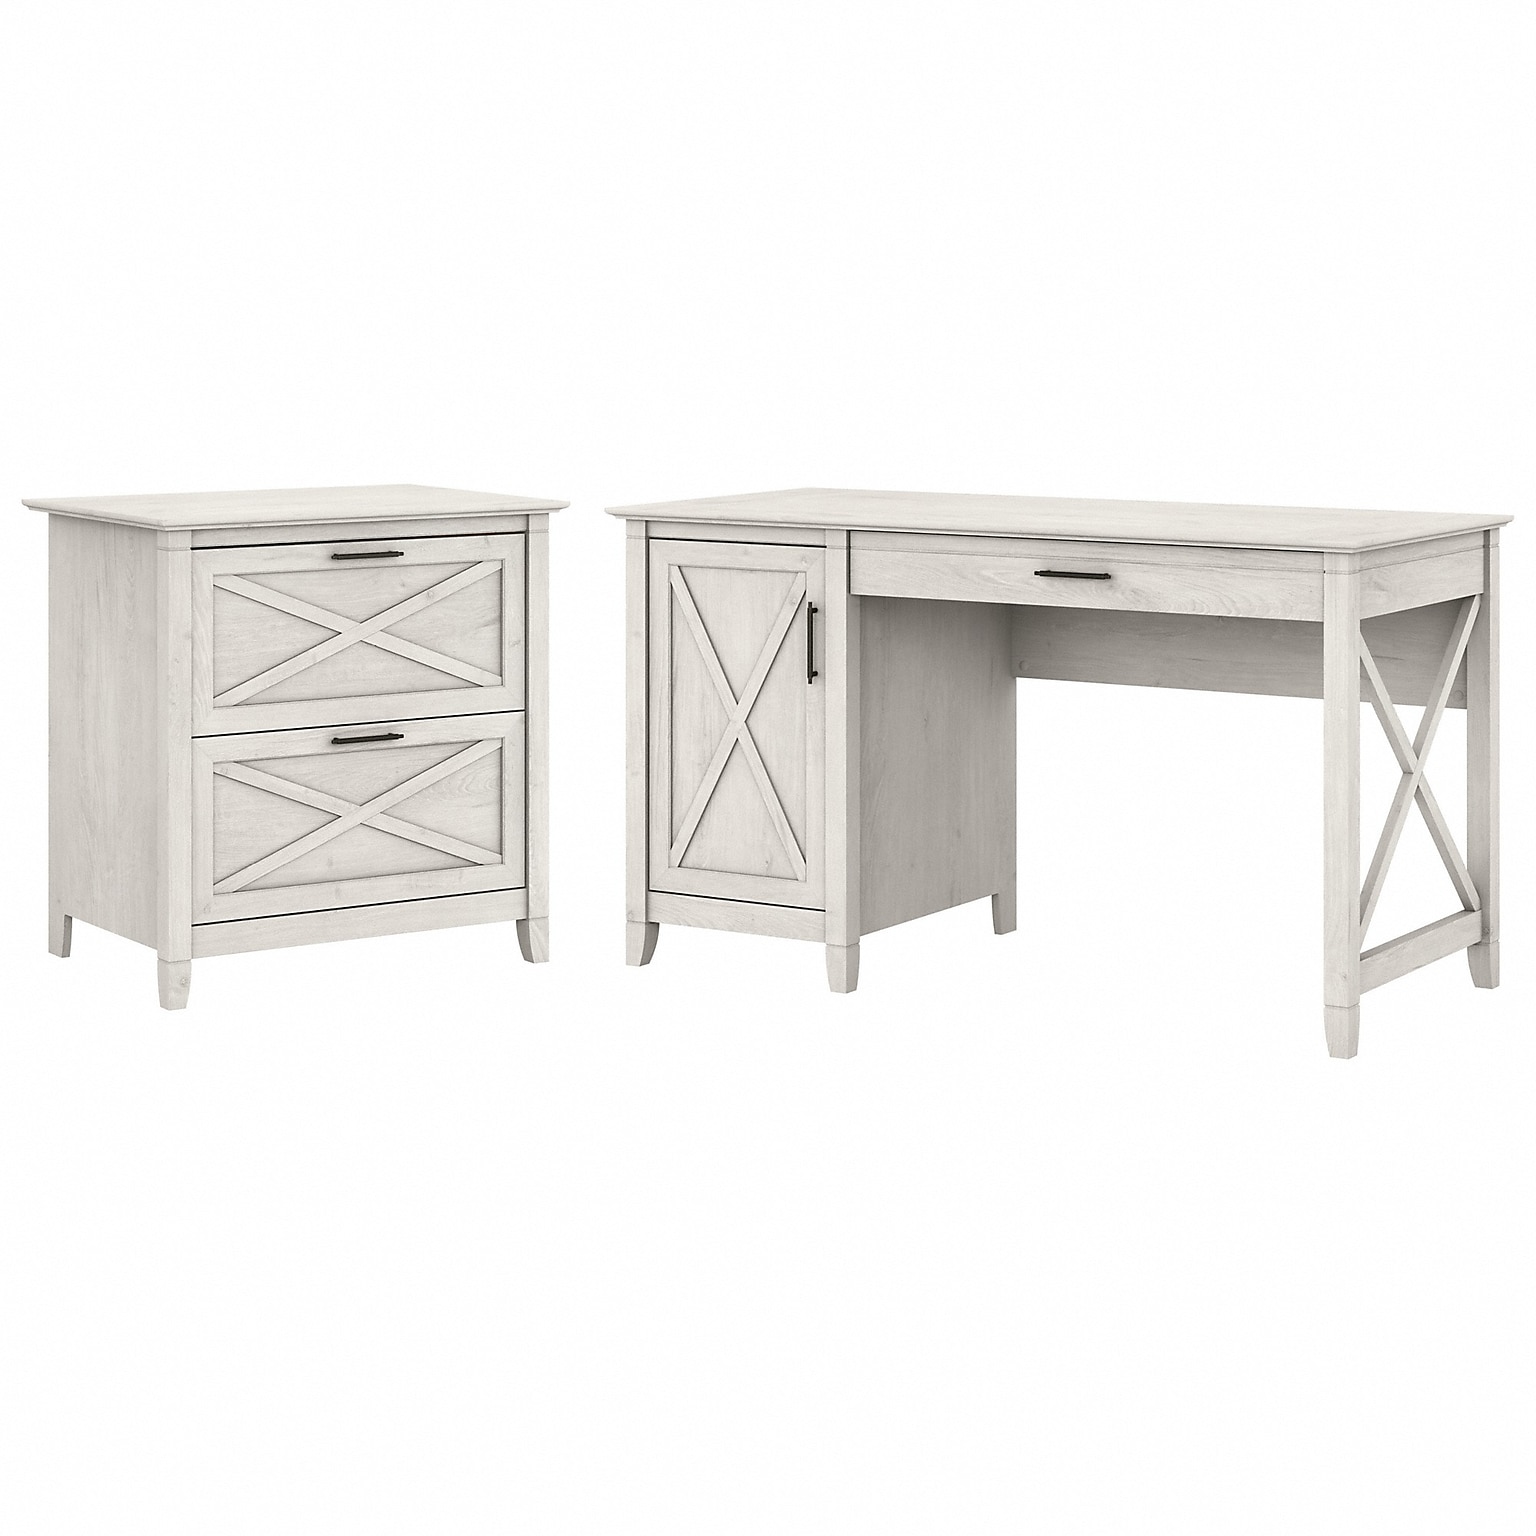 Bush Furniture Key West 54W Computer Desk with Storage and 2-Drawer Lateral File Cabinet, Linen White Oak (KWS008LW)